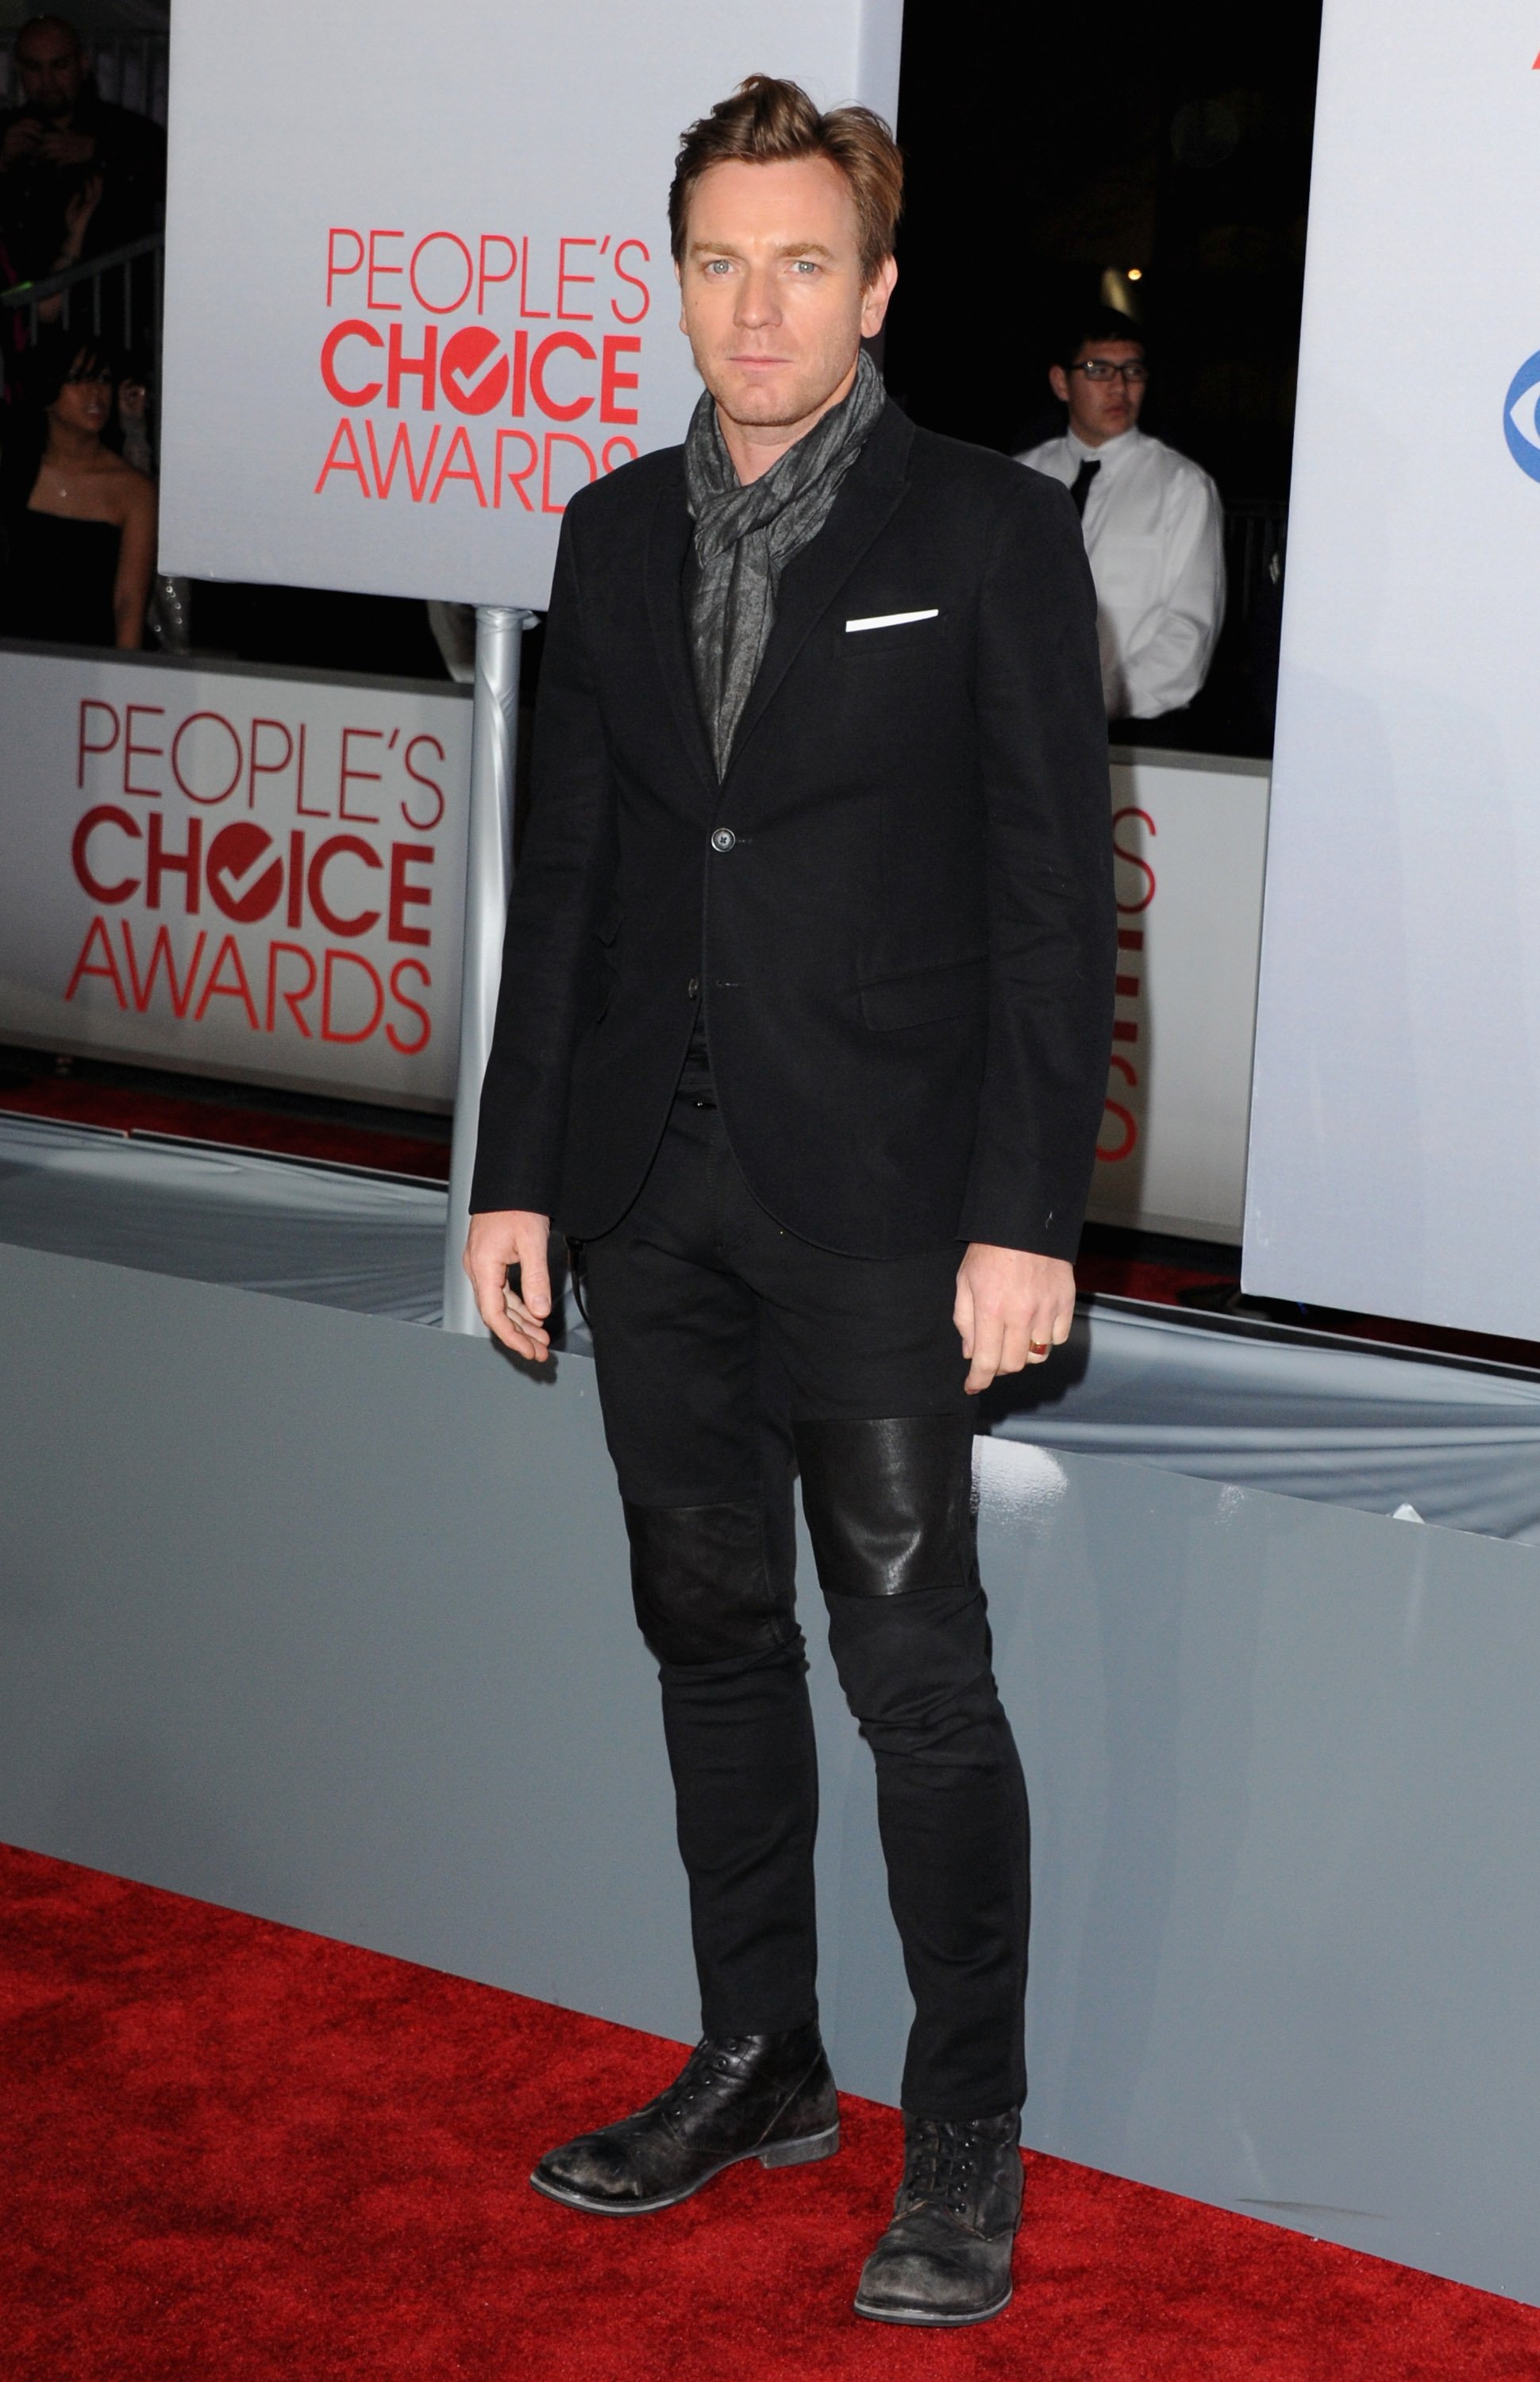 2012-01-11-Peoples-Choice-Awards-Arrivals-023.jpg